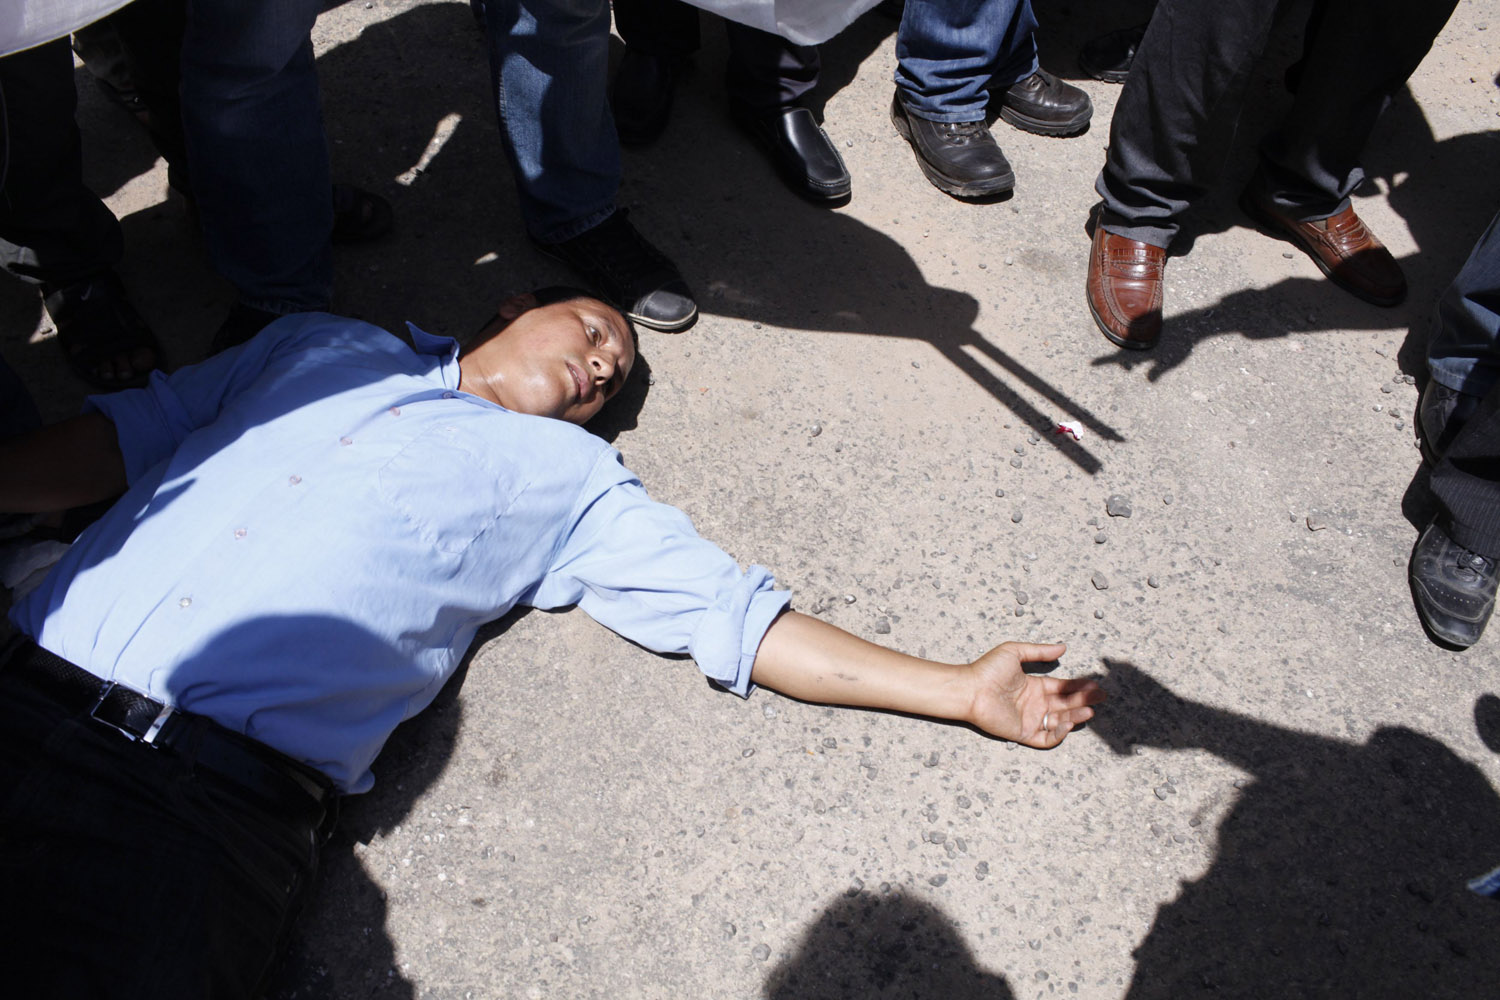 Demonstrators stand near a man during a protest by taxi drivers outside the police headquarters in Casablanca